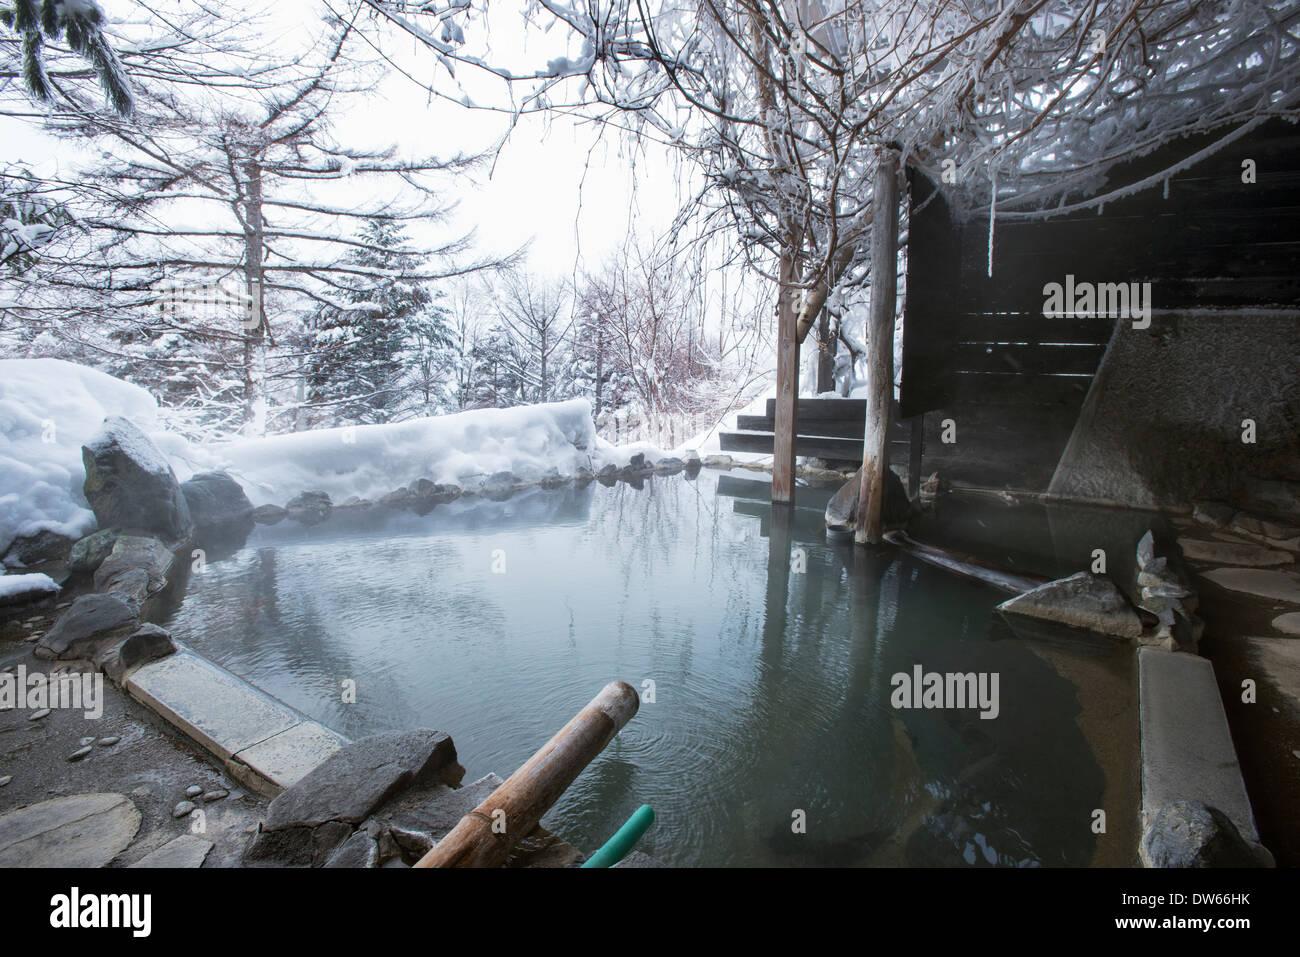 A rotenburo outdoors onsen hot spring in winter and surrounded by snow. Image taken in Nagano, Japan Stock Photo